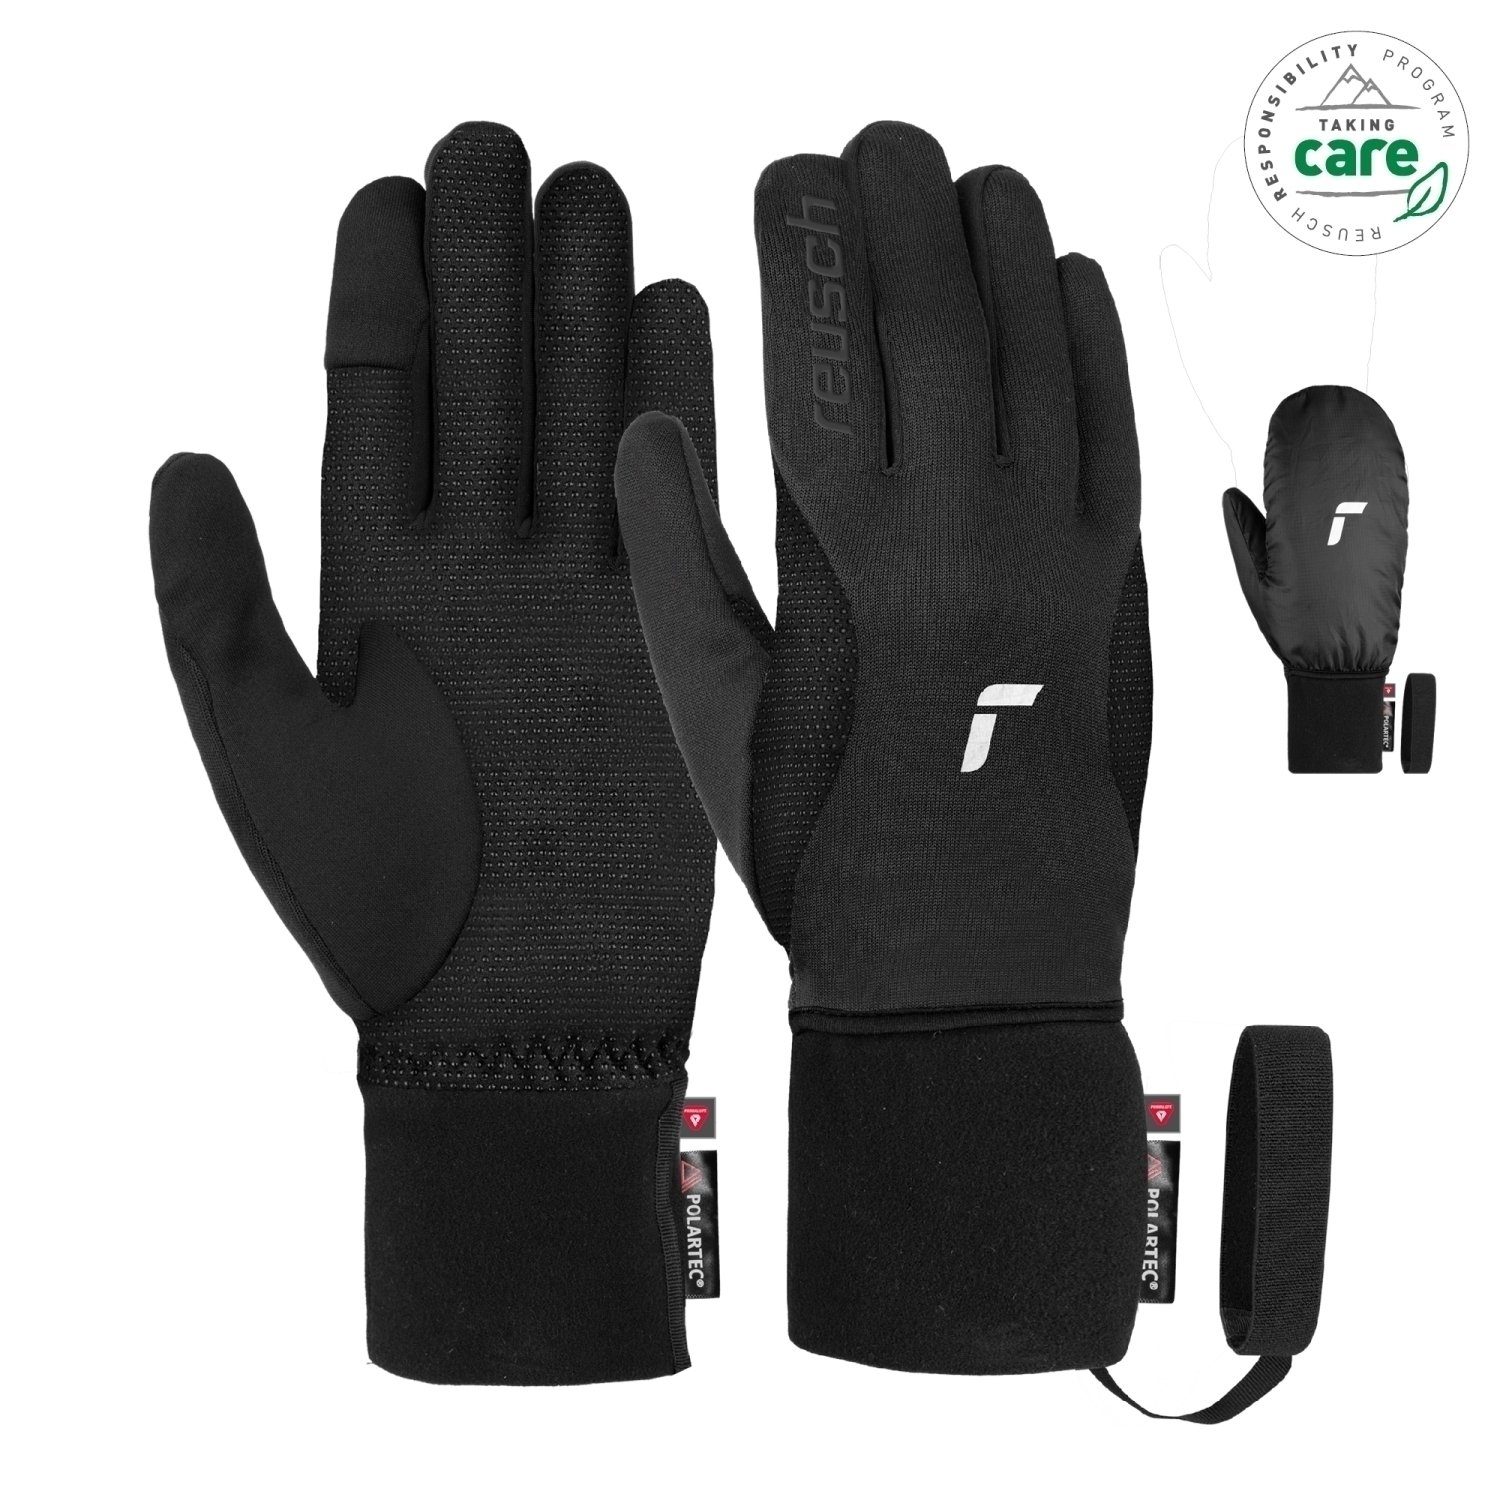 Baffin TOUCH-TEC Reusch Handschuh Reusch Fleecehandschuhe